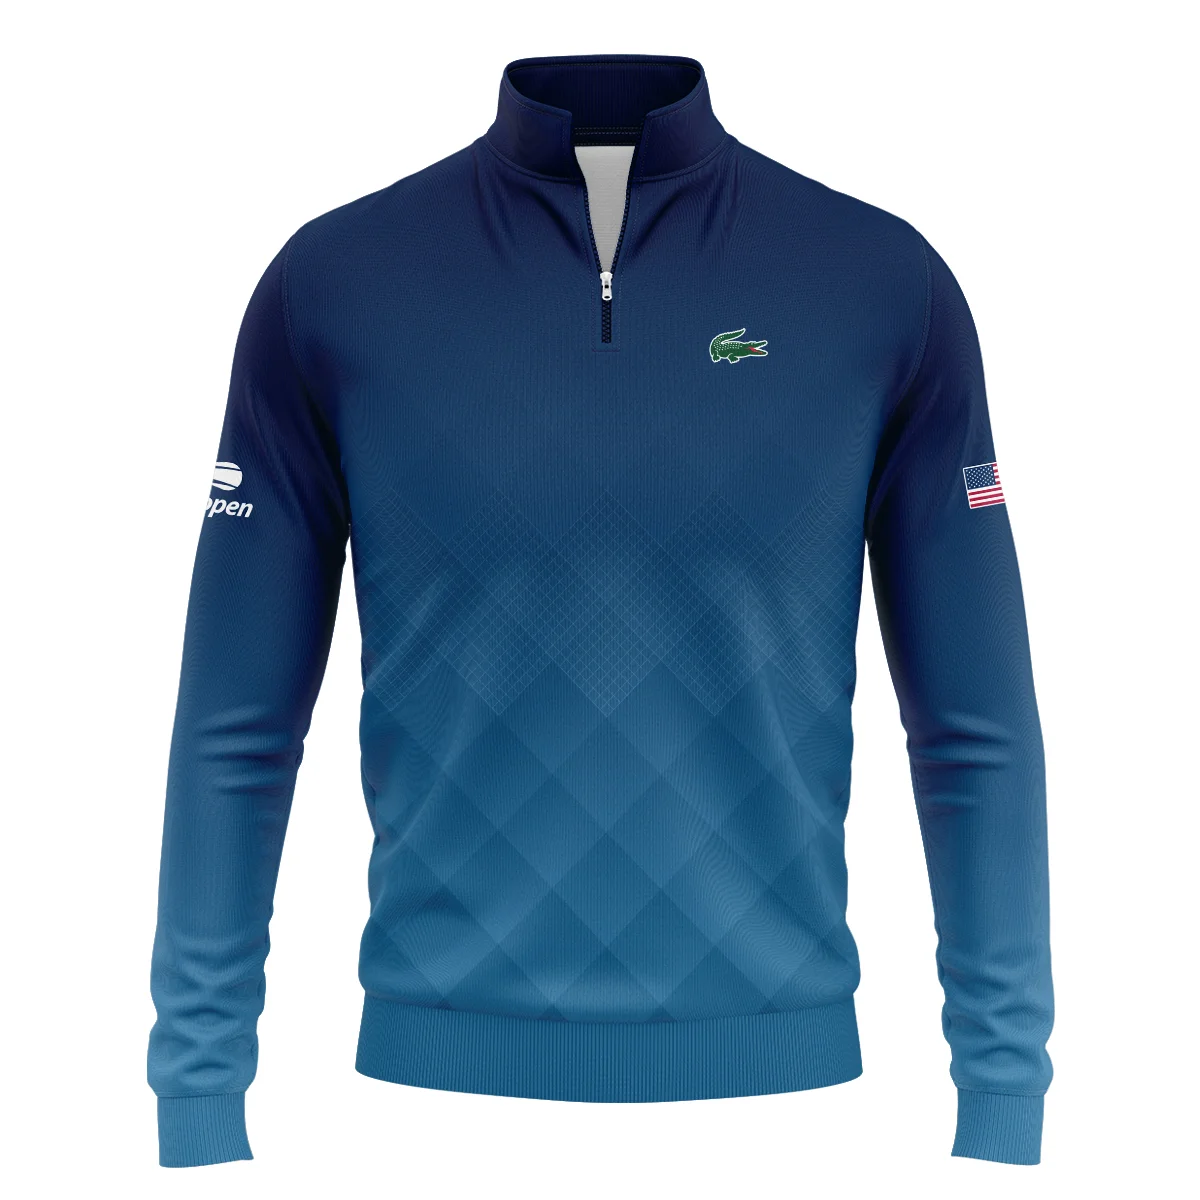 Lacoste Blue Abstract Background US Open Tennis Champions Hoodie Shirt Style Classic Hoodie Shirt